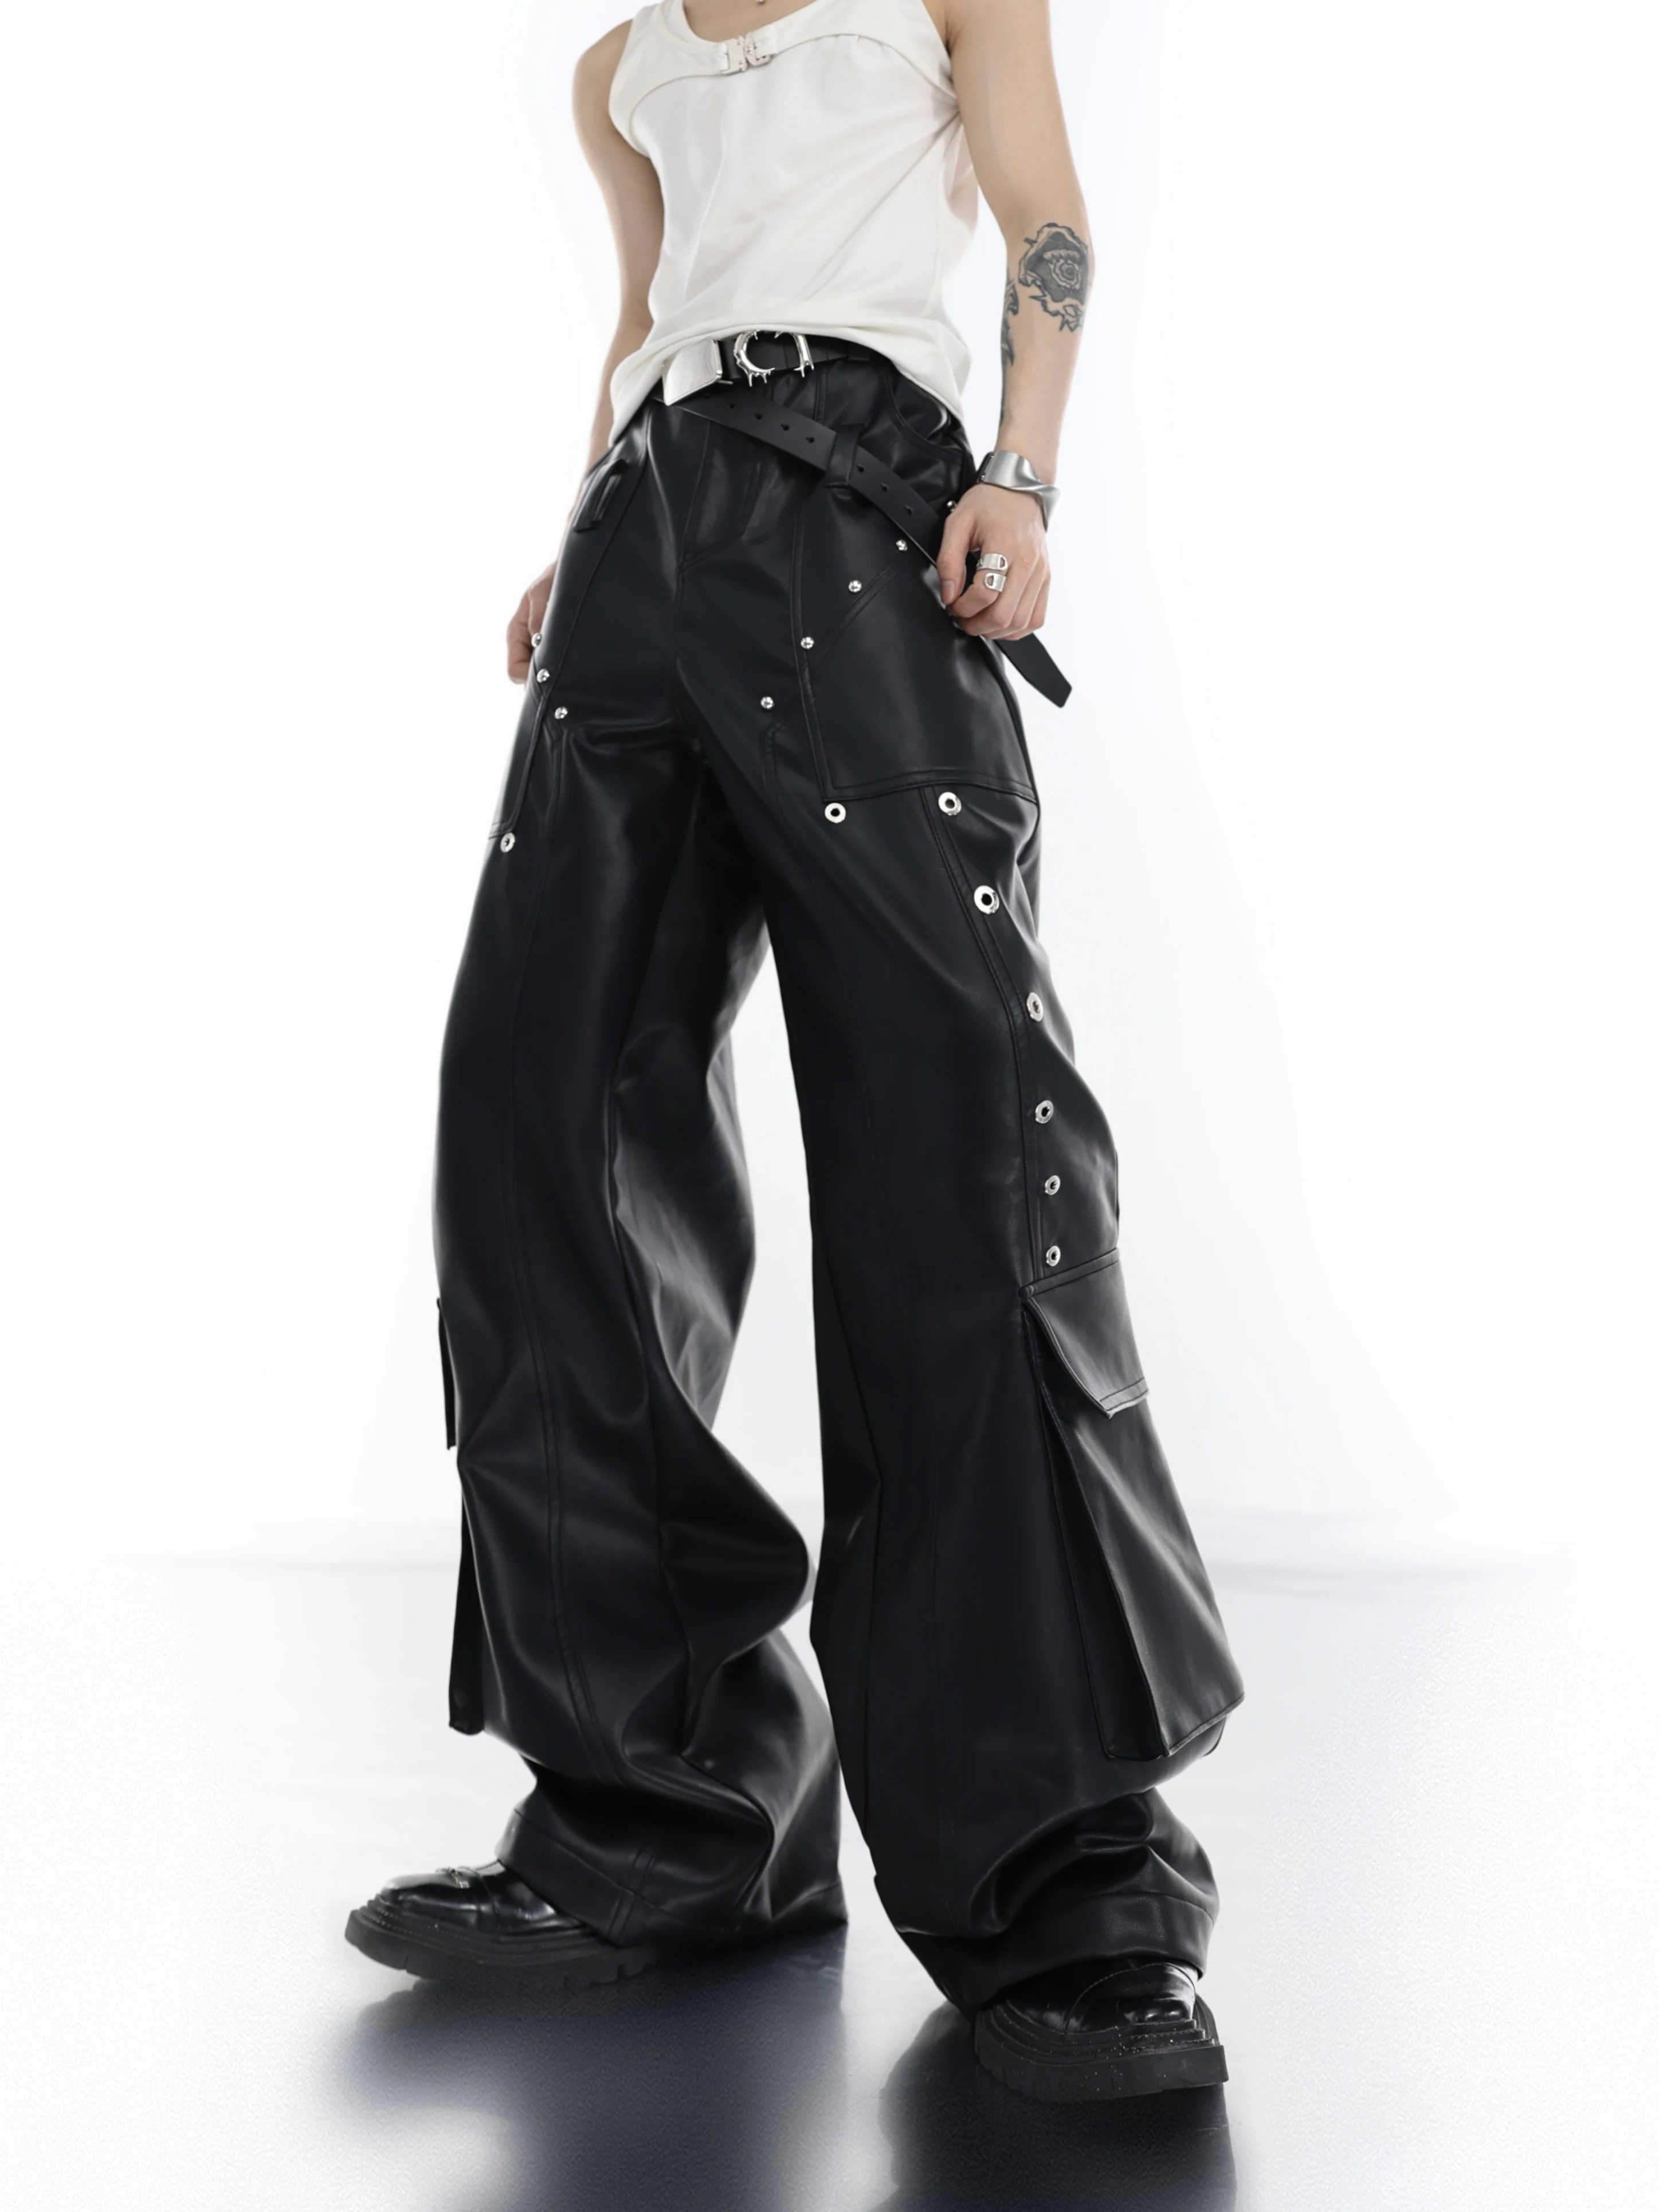 27-46 New 2023 Men Women Clothing Yamamoto Style Punk PU Metal Decorative Leather Pants Trousers Lovers Plus Size Stage Costumes